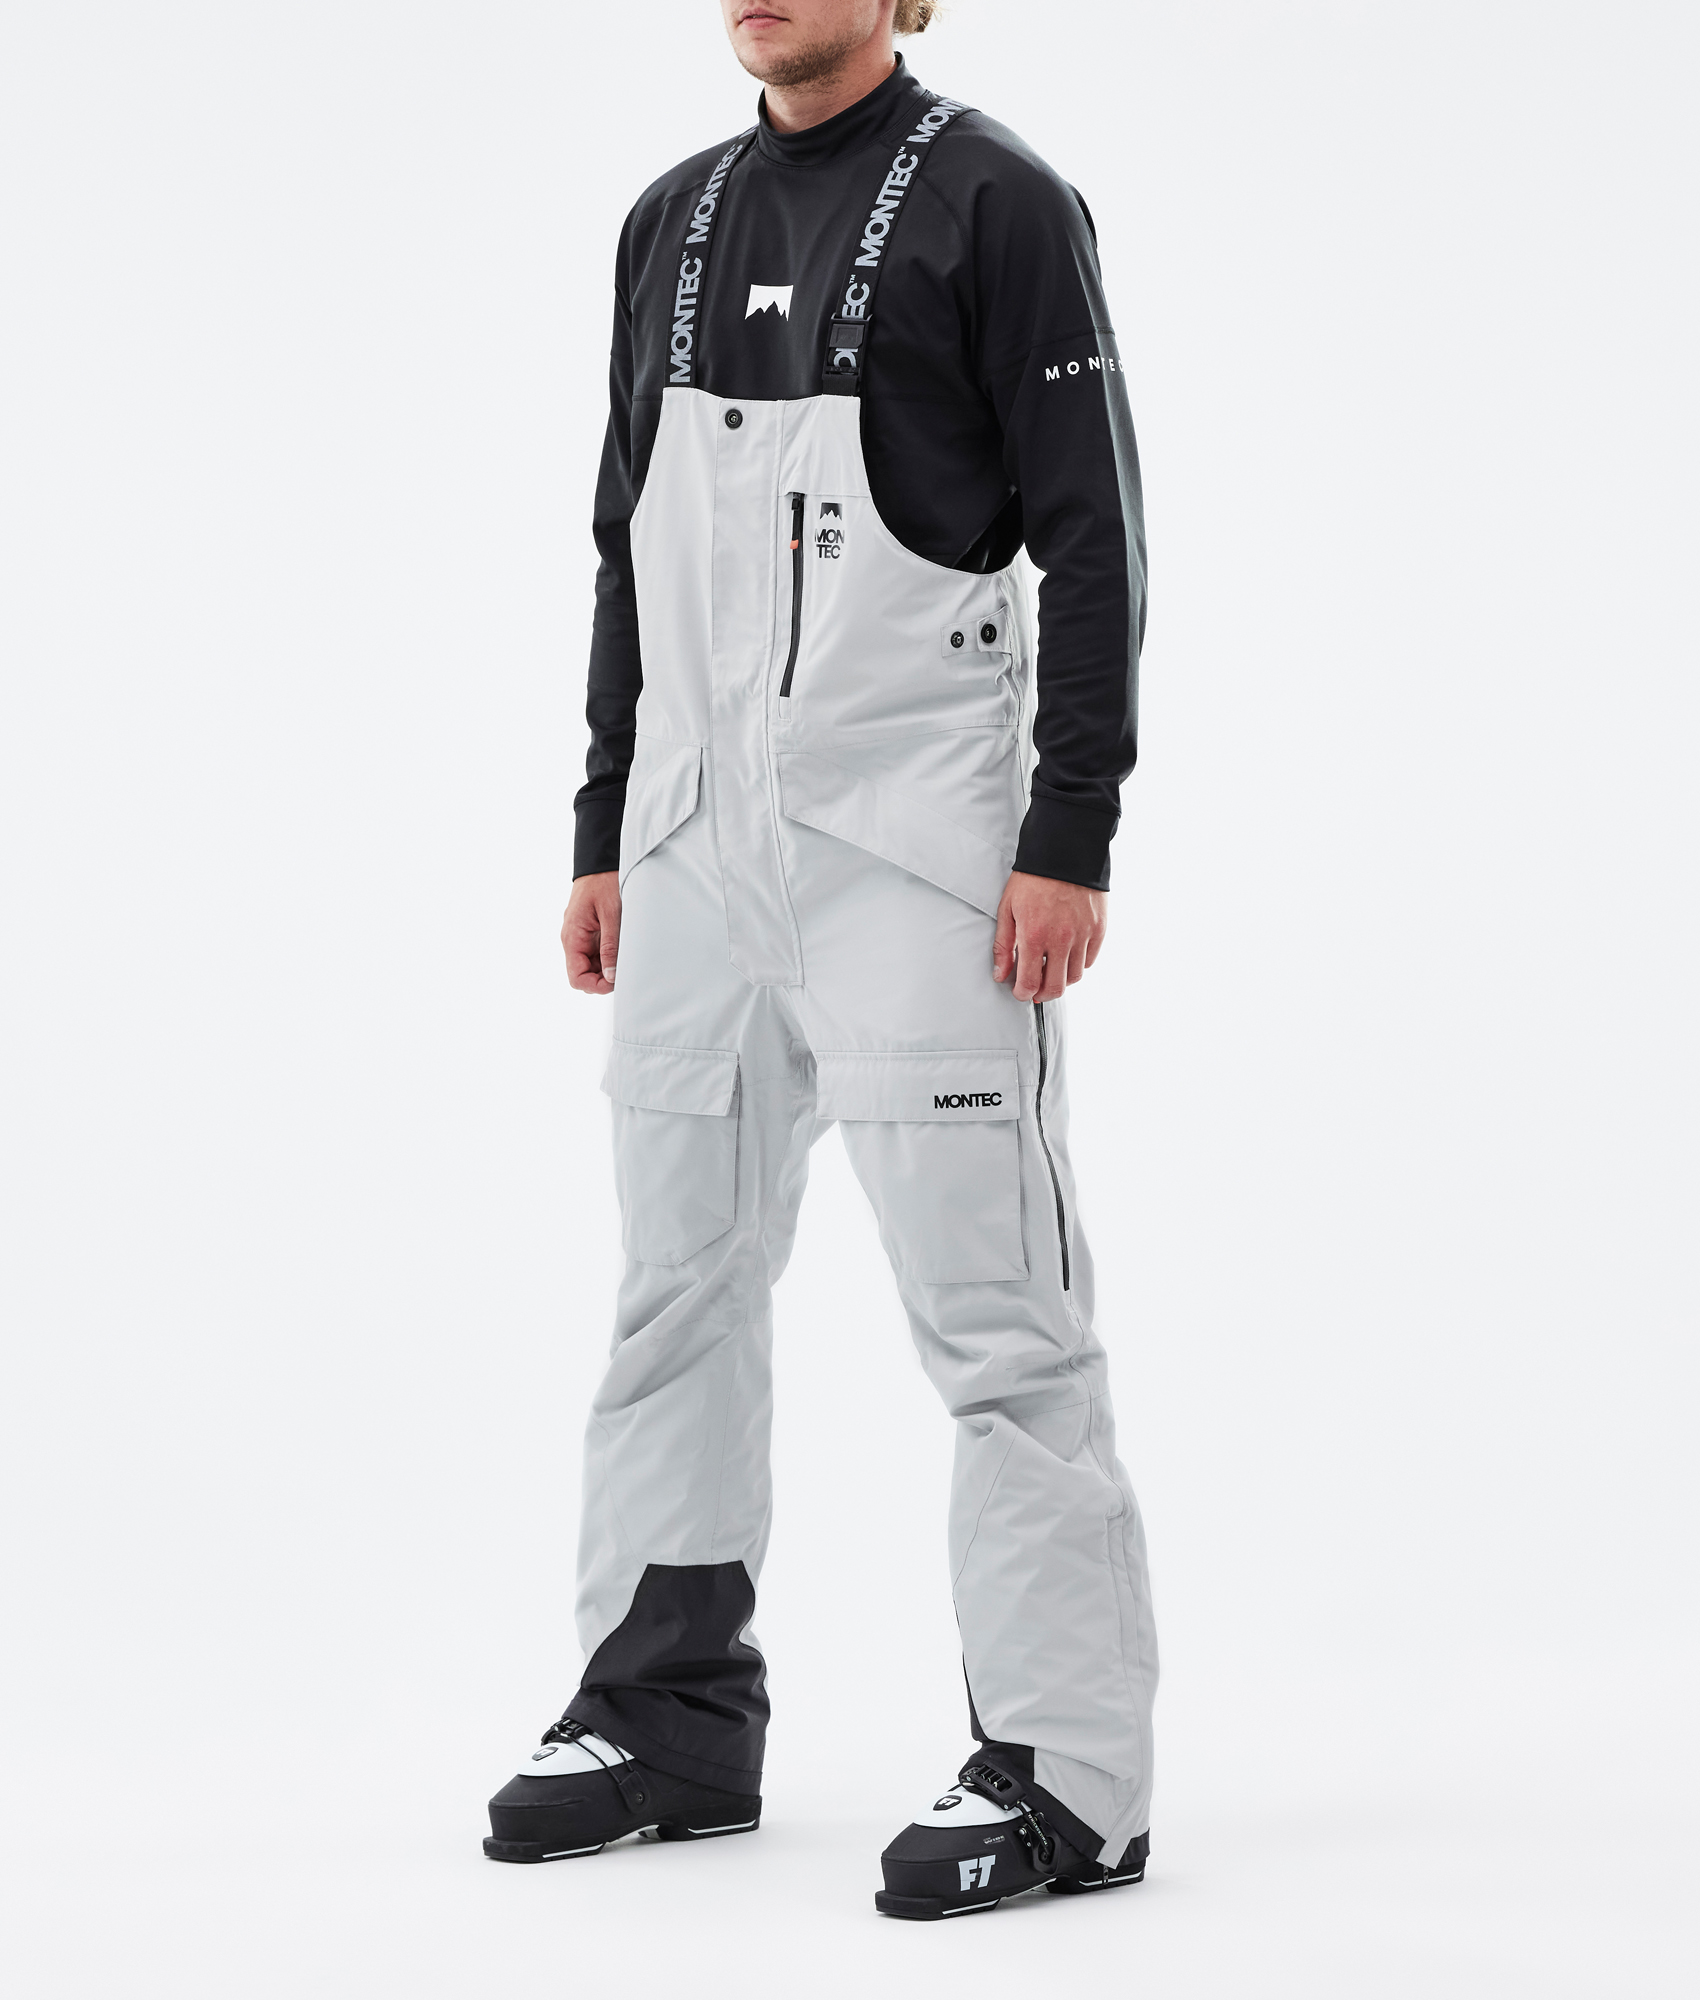 mens white ski pants - OFF-69% >Free Delivery